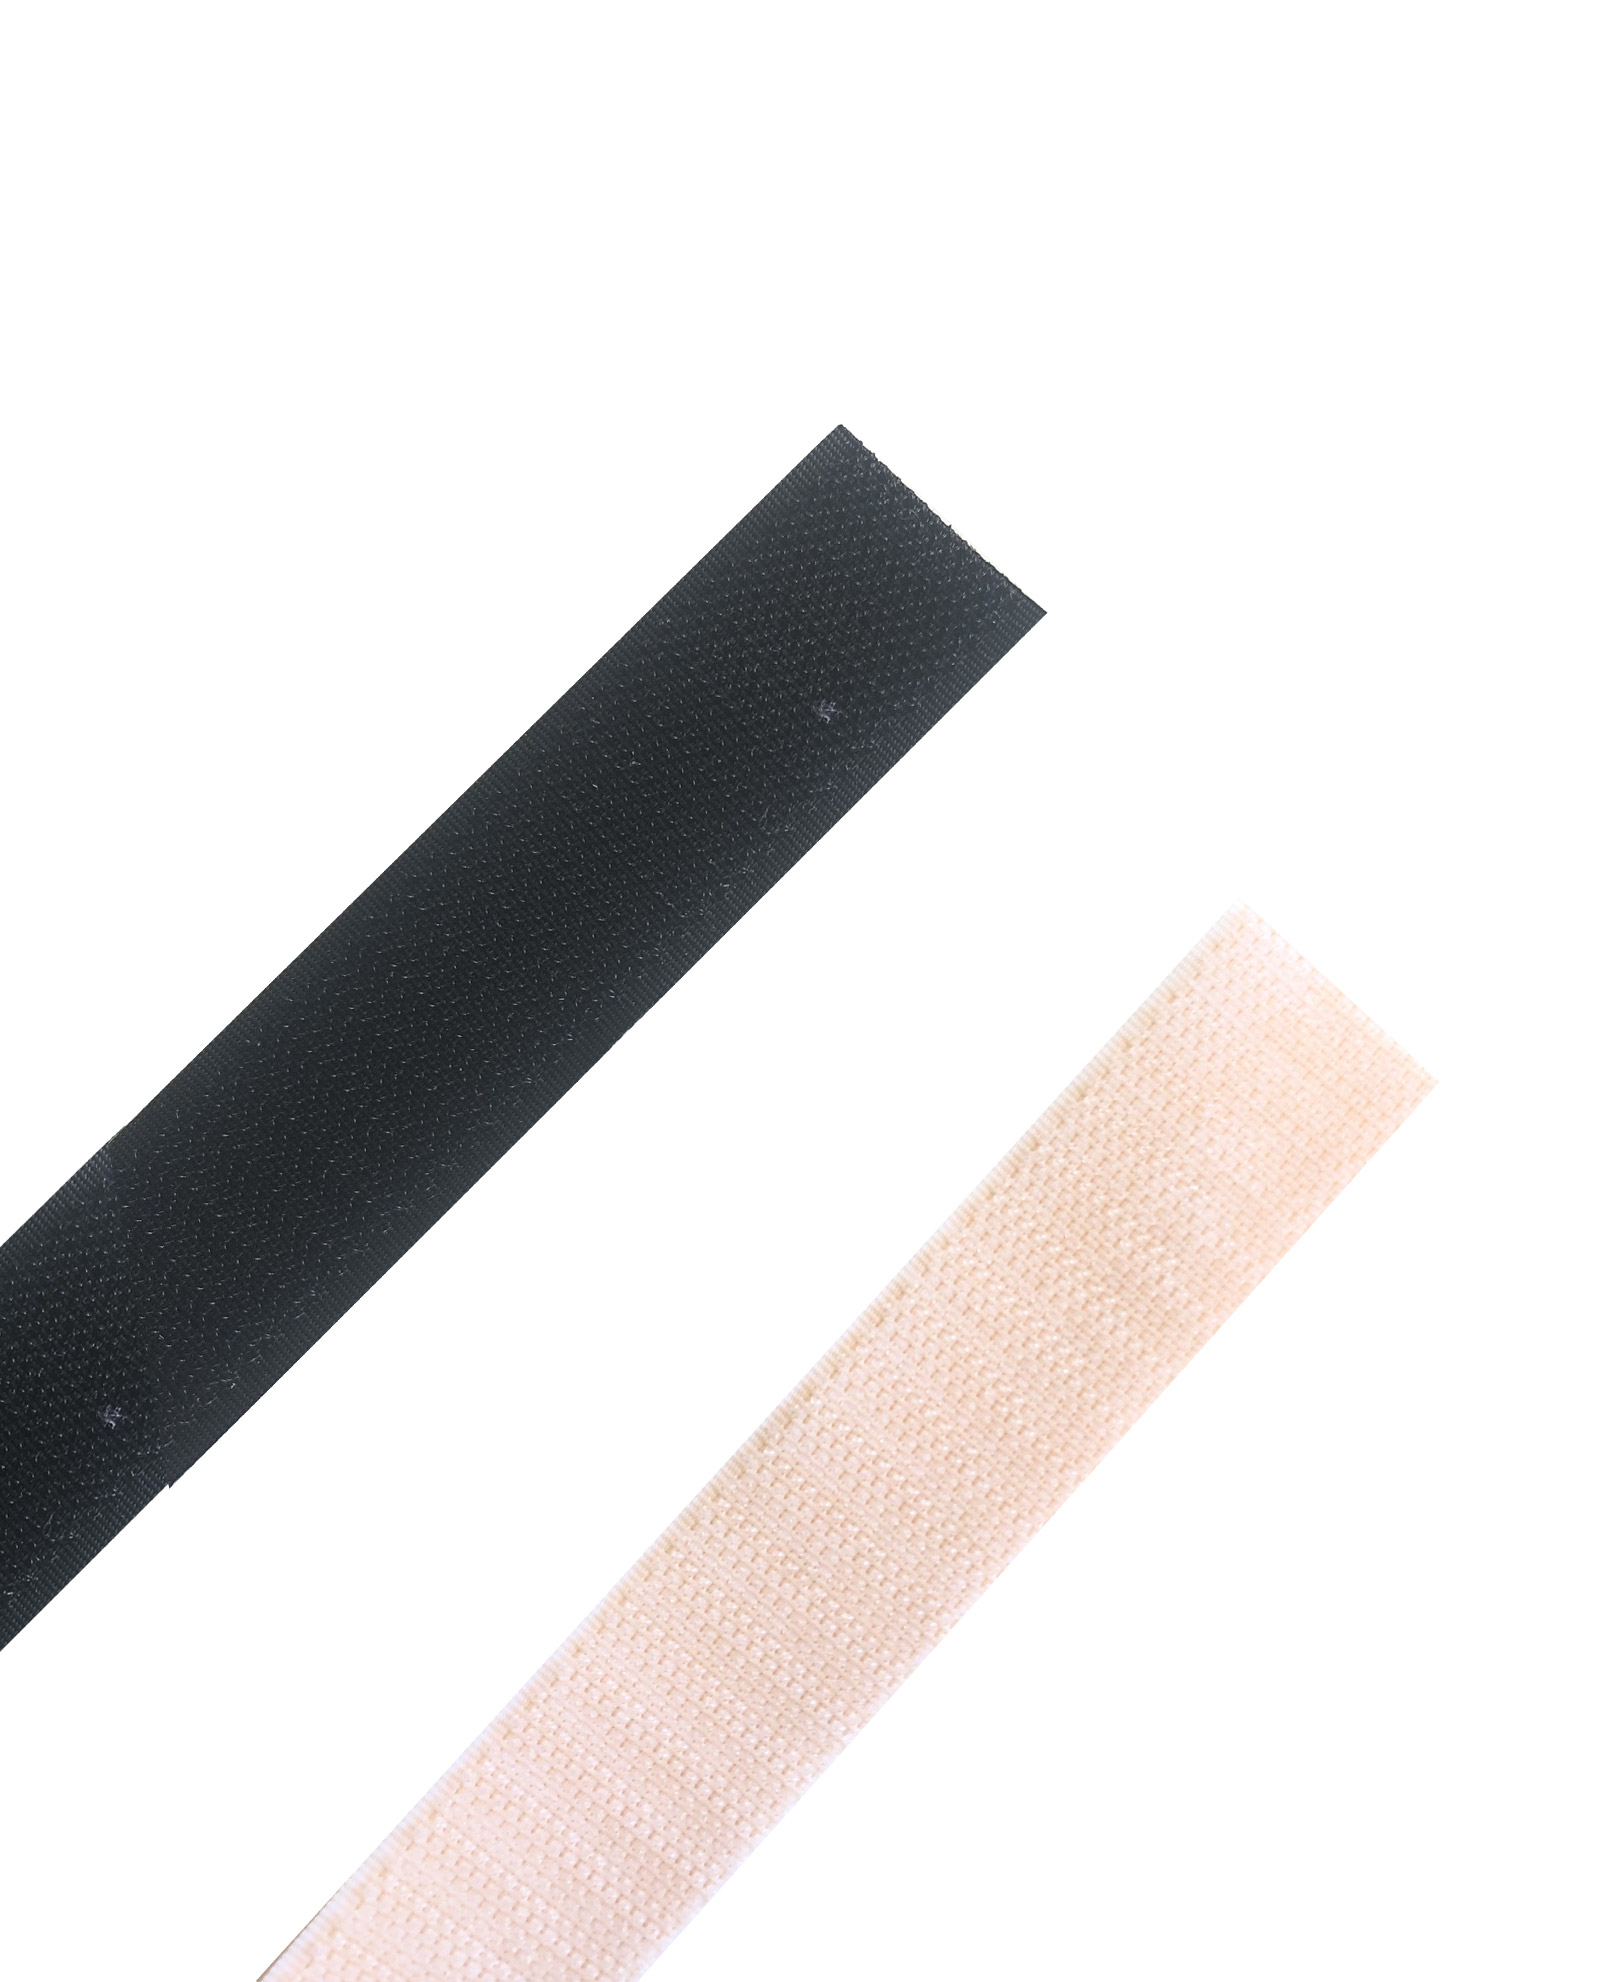 Self adhesive Velcro 25mm x 5m  Shop Today. Get it Tomorrow